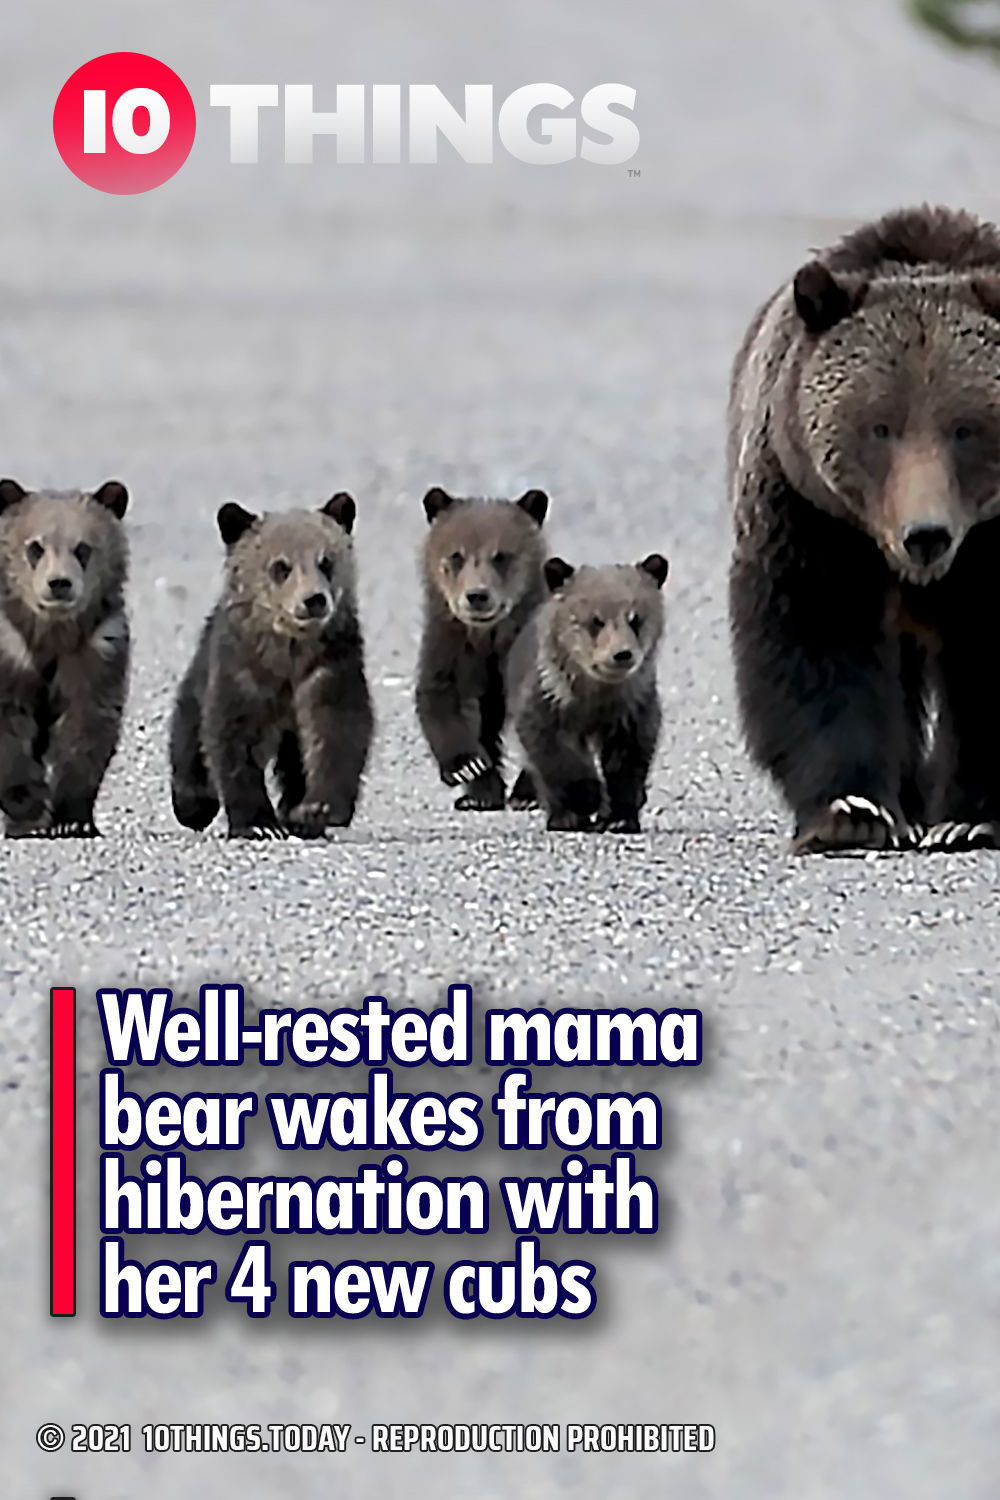 Well-rested mama bear wakes from hibernation with her 4 new cubs